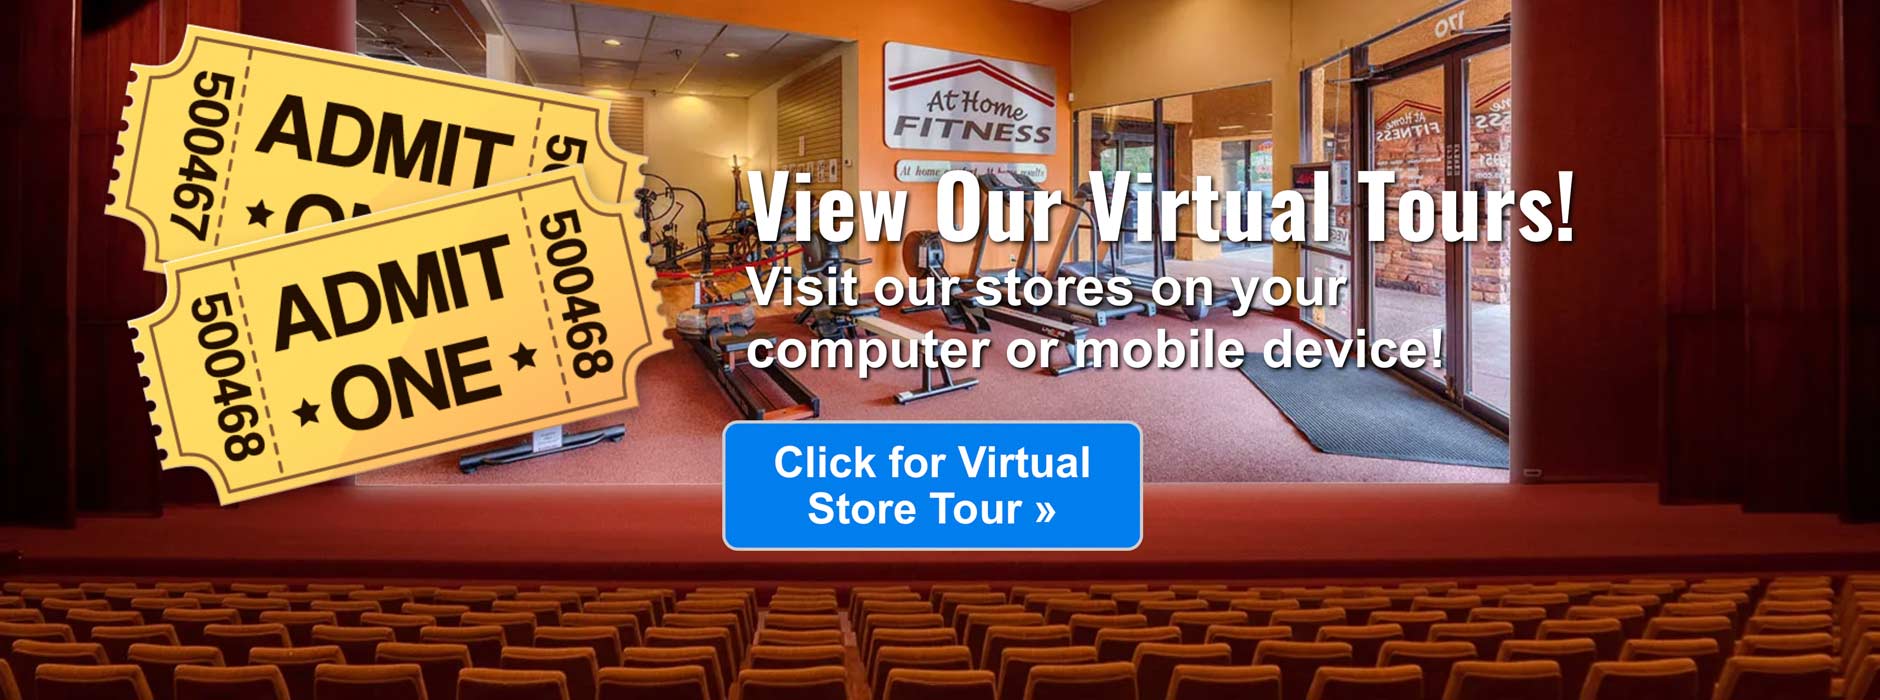 View our virtual tours - store locator and virtual tours of At Home Fitness Showrooms